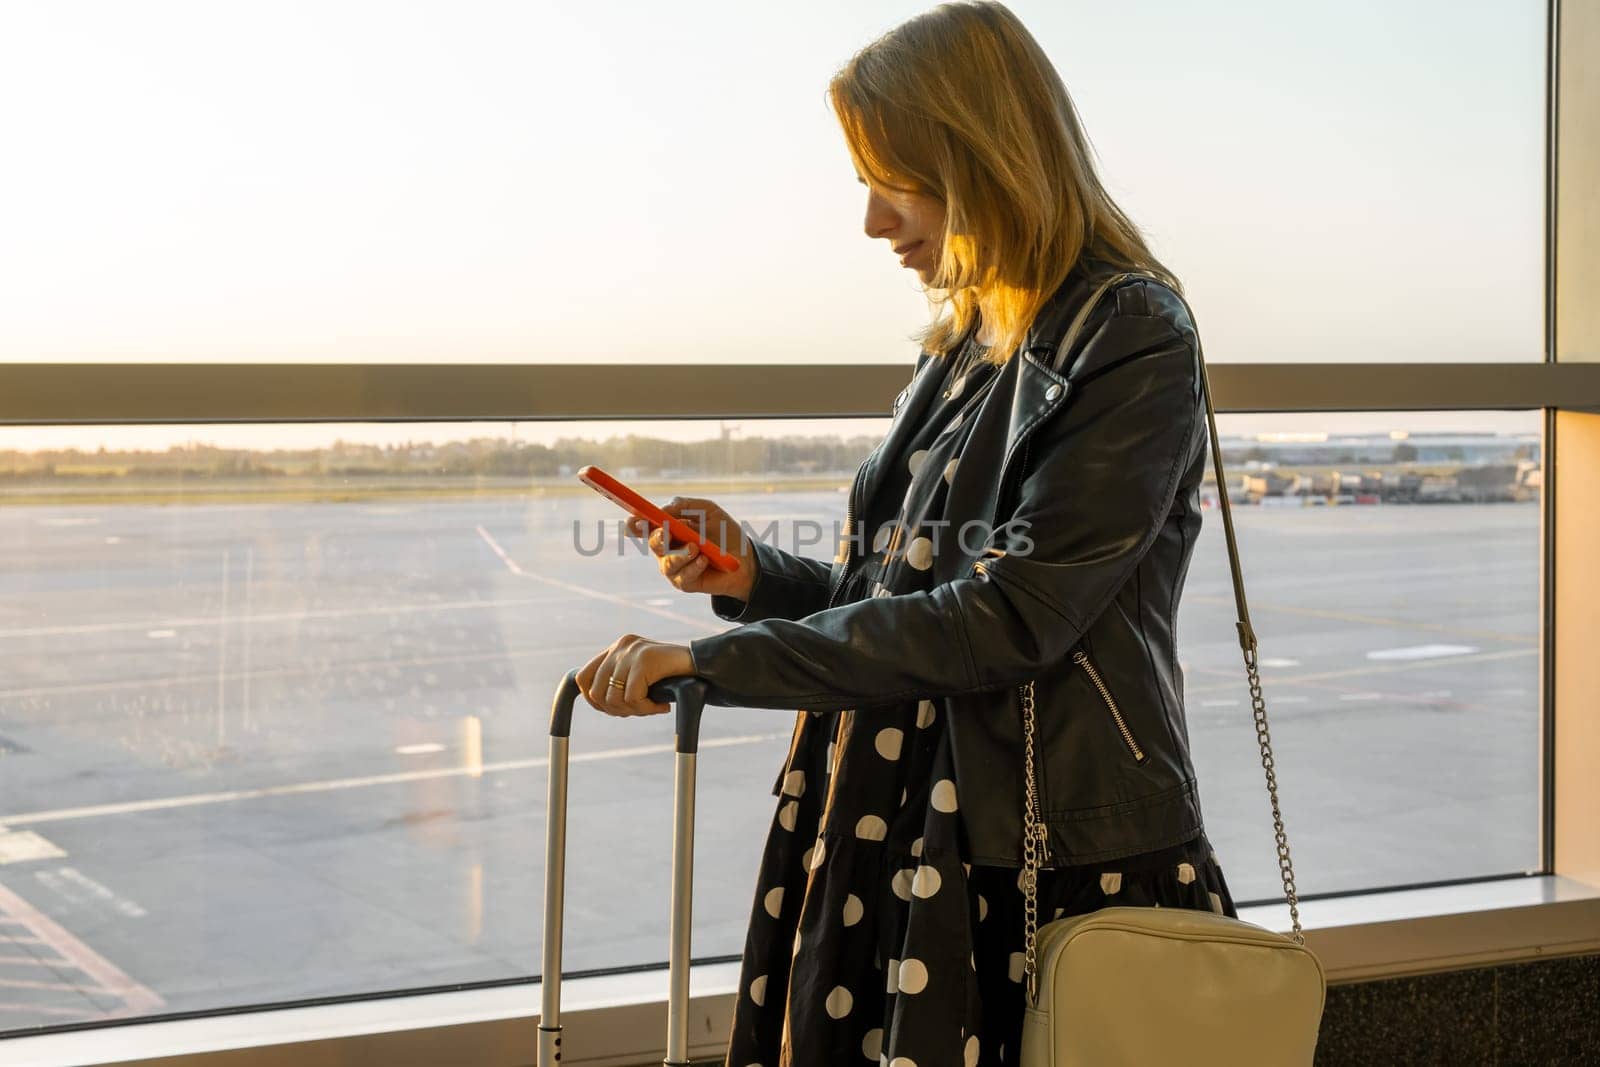 In the airport at sunset, a young woman, sporting a black jacket and polka-dot dress, is ready for boarding with her suitcase and checking her smartphone